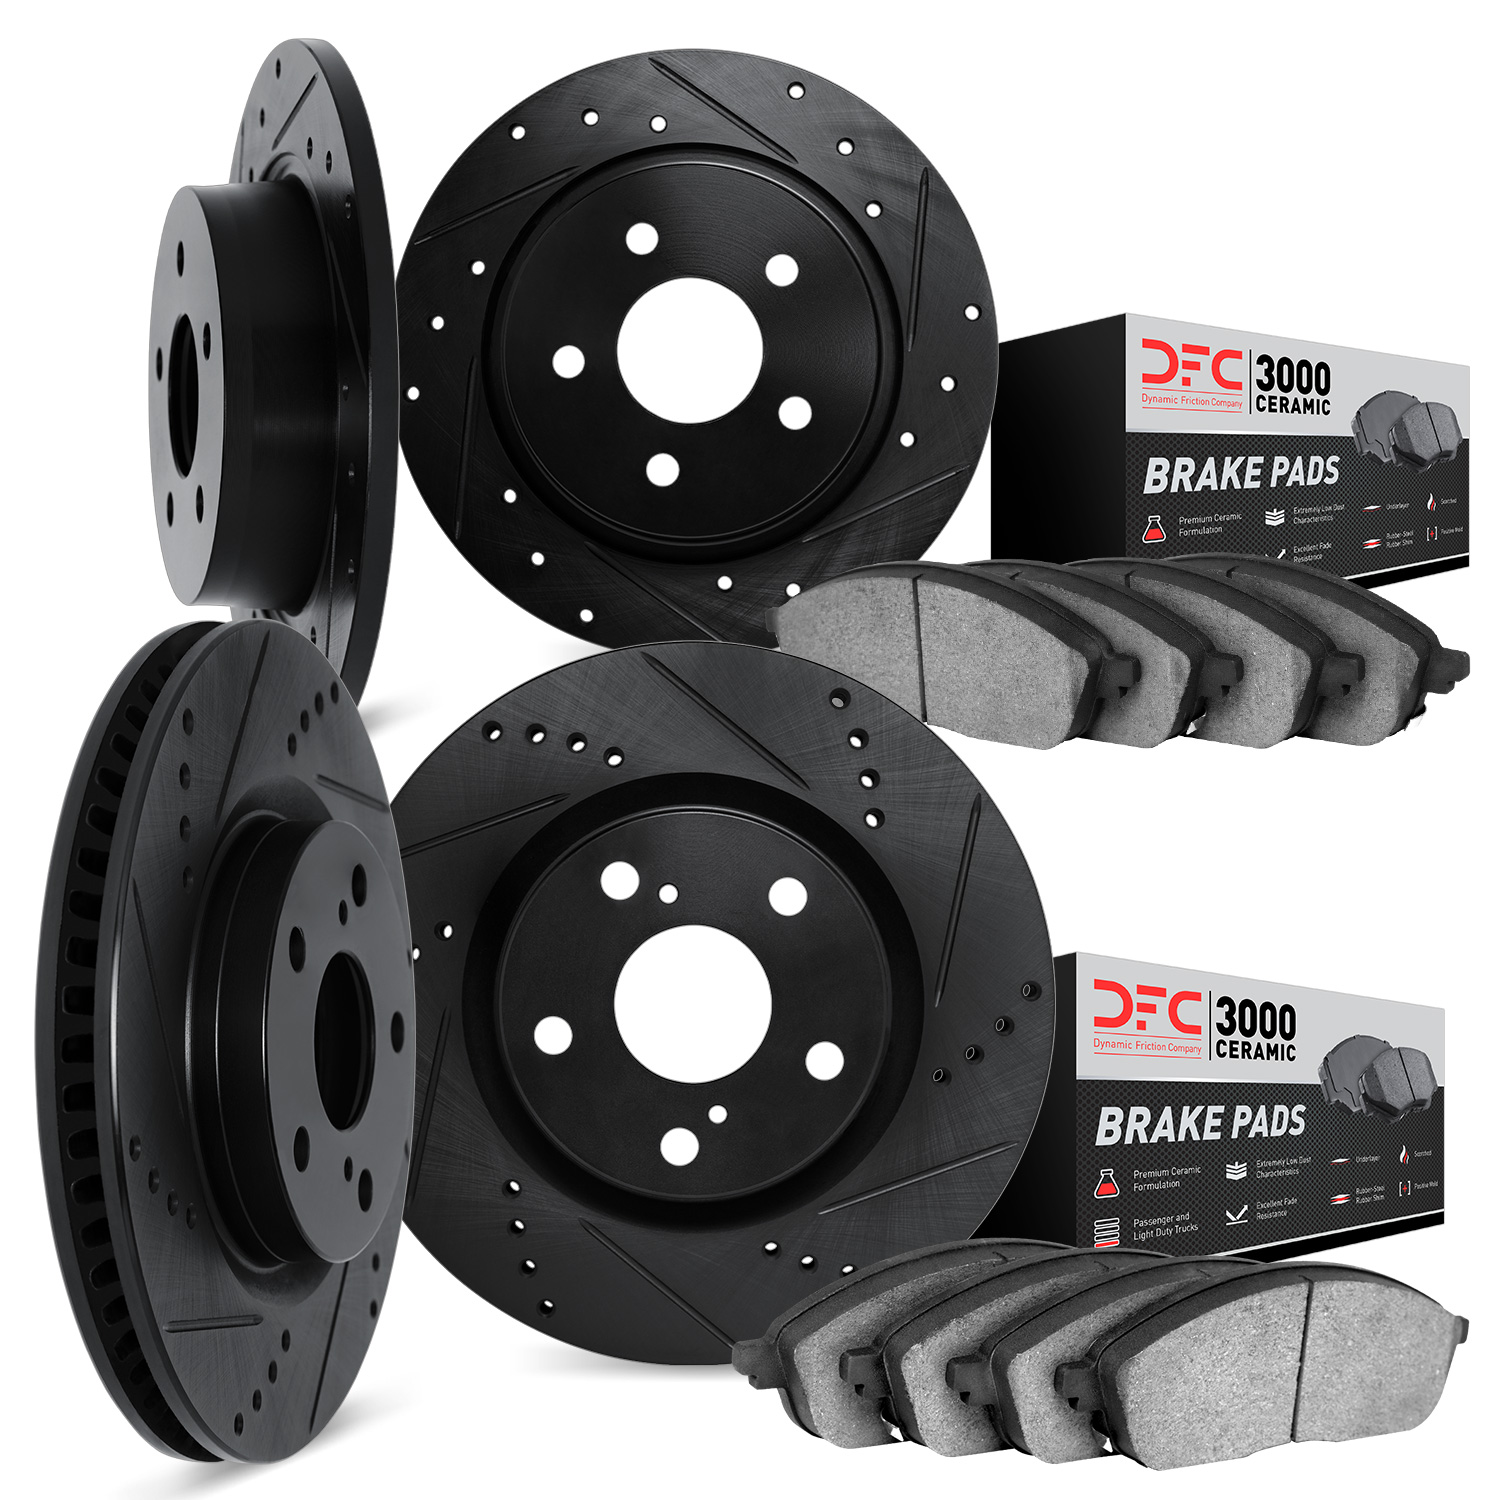 8304-59020 Drilled/Slotted Brake Rotors with 3000-Series Ceramic Brake Pads Kit [Black], 1997-2001 Acura/Honda, Position: Front